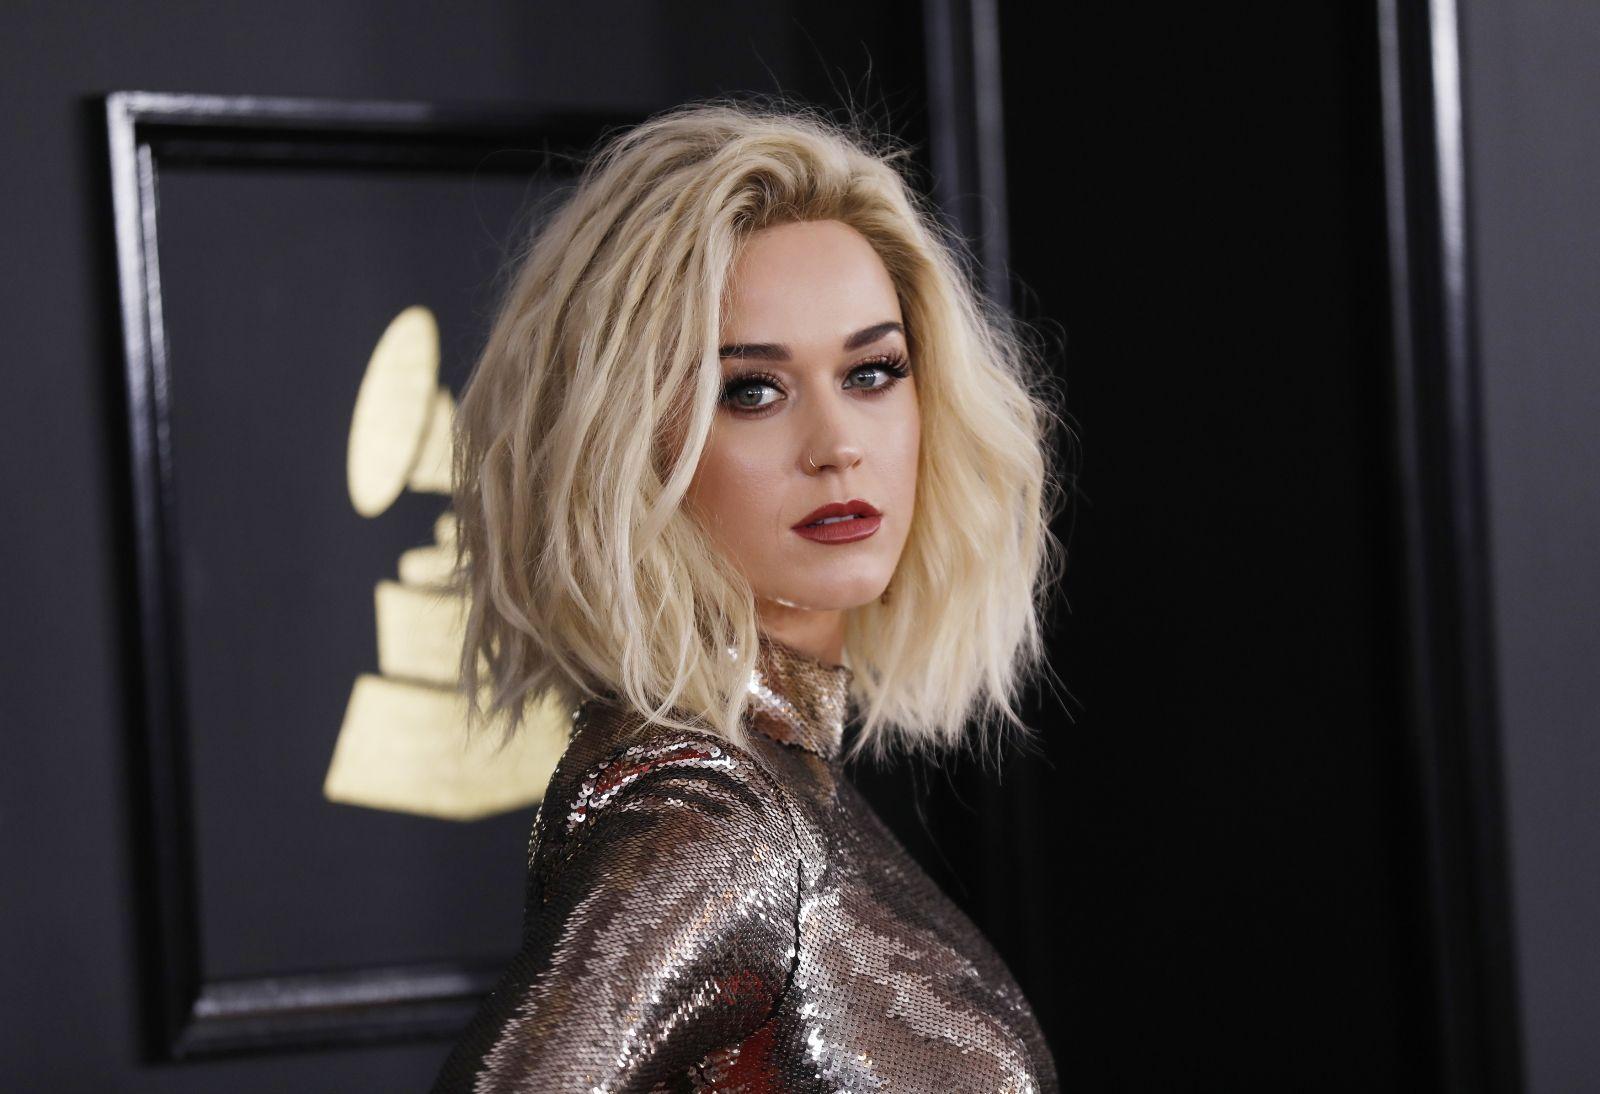 Katy Perry 'excited' to perform new single Chained To The Rhythm